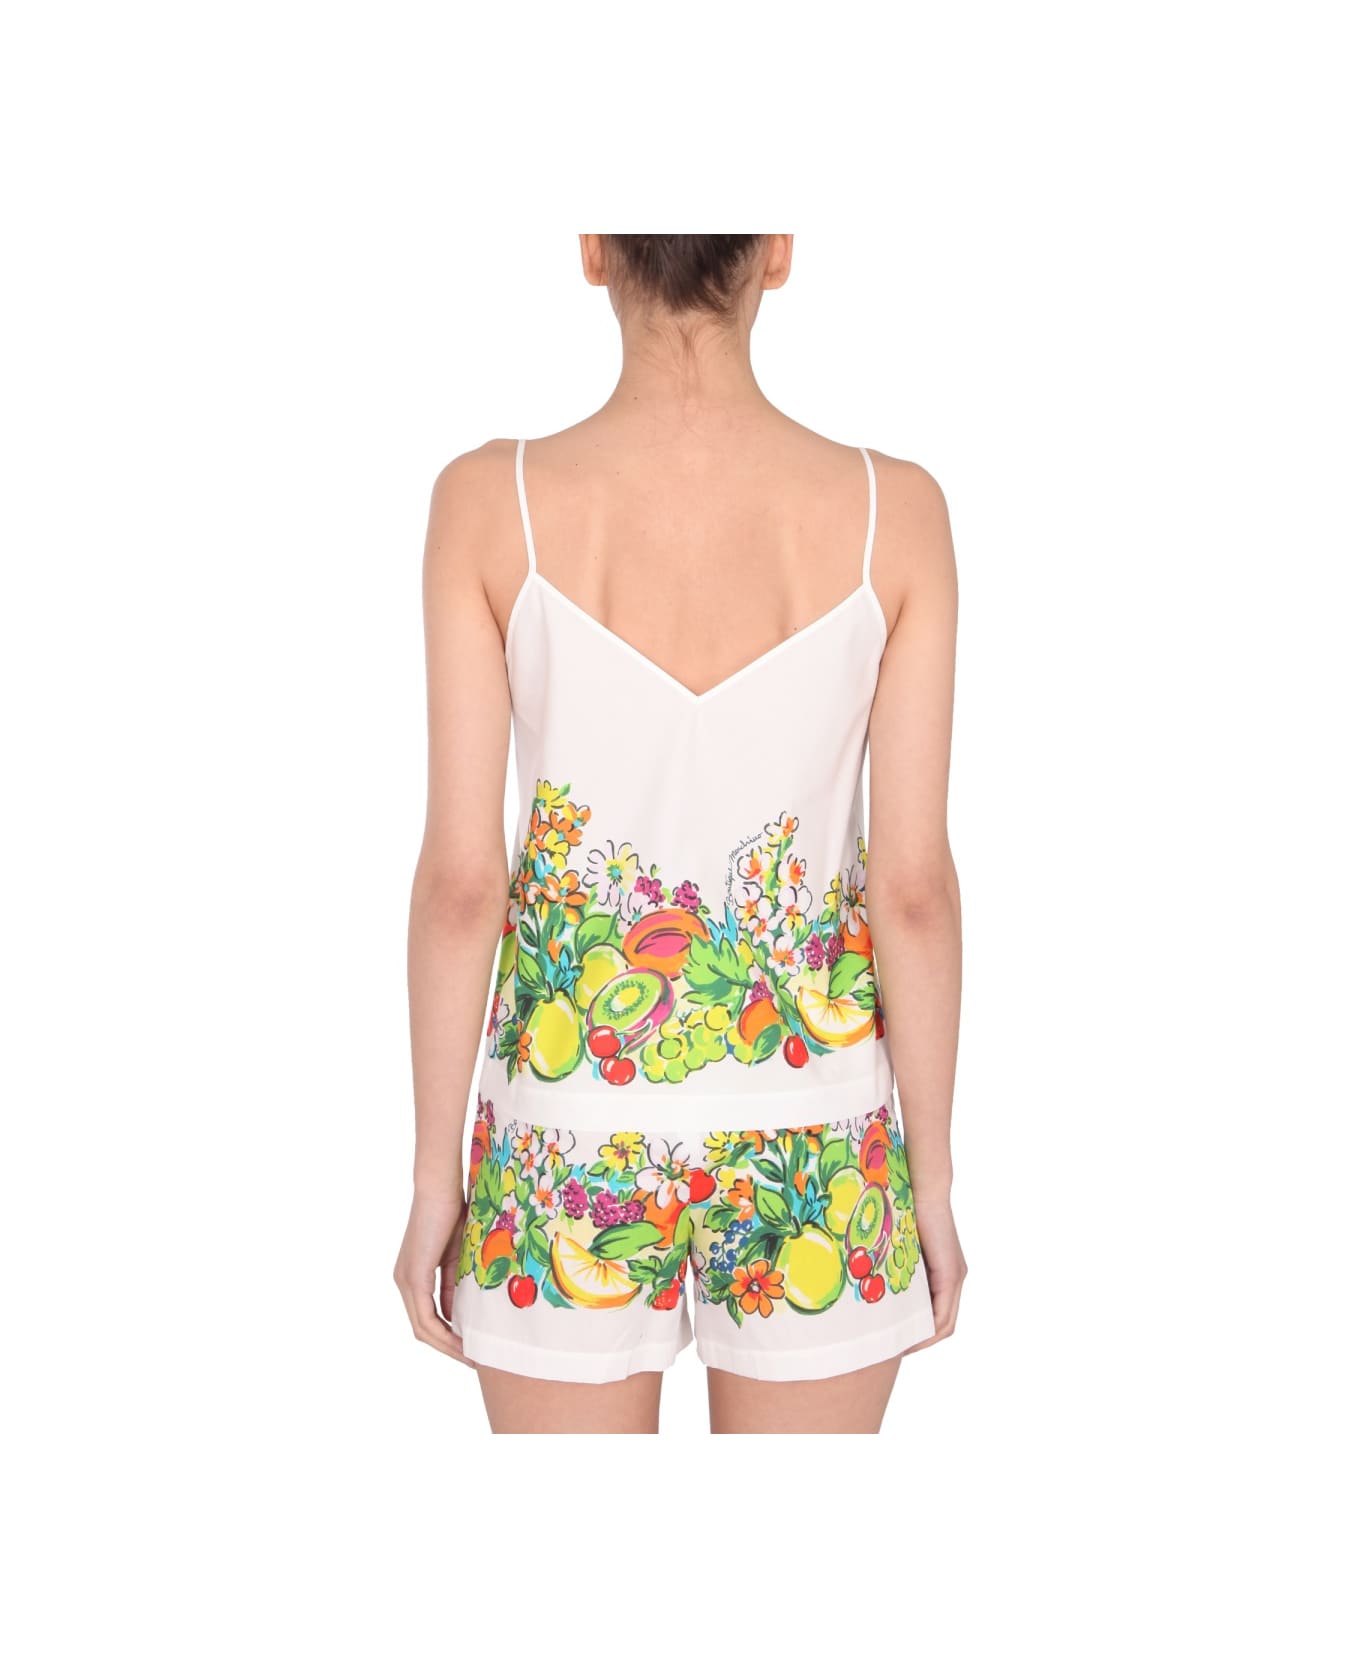 Boutique Moschino Flower And Fruit Print Top - MULTICOLOUR キャミソール